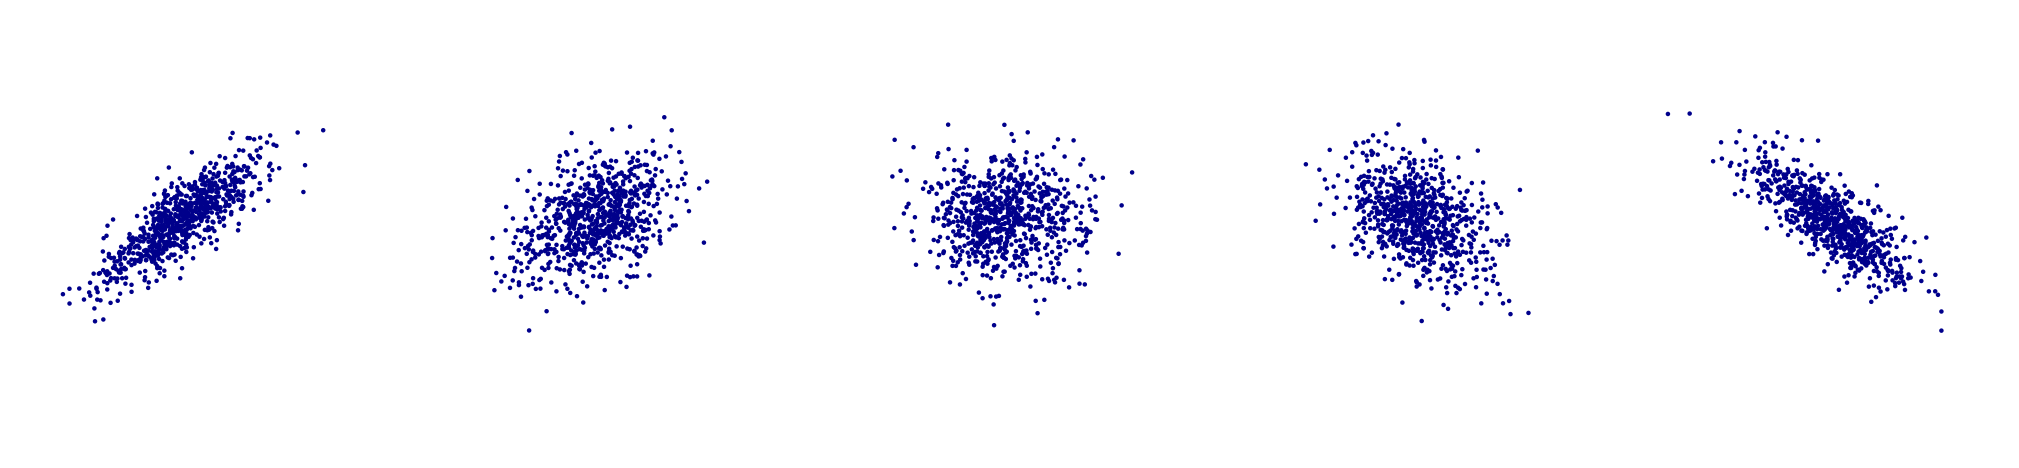 Five different scatter plots. Author: Denis Boigelot. Source: [Wikimedia](https://commons.wikimedia.org/wiki/File:Correlation_examples2.svg)